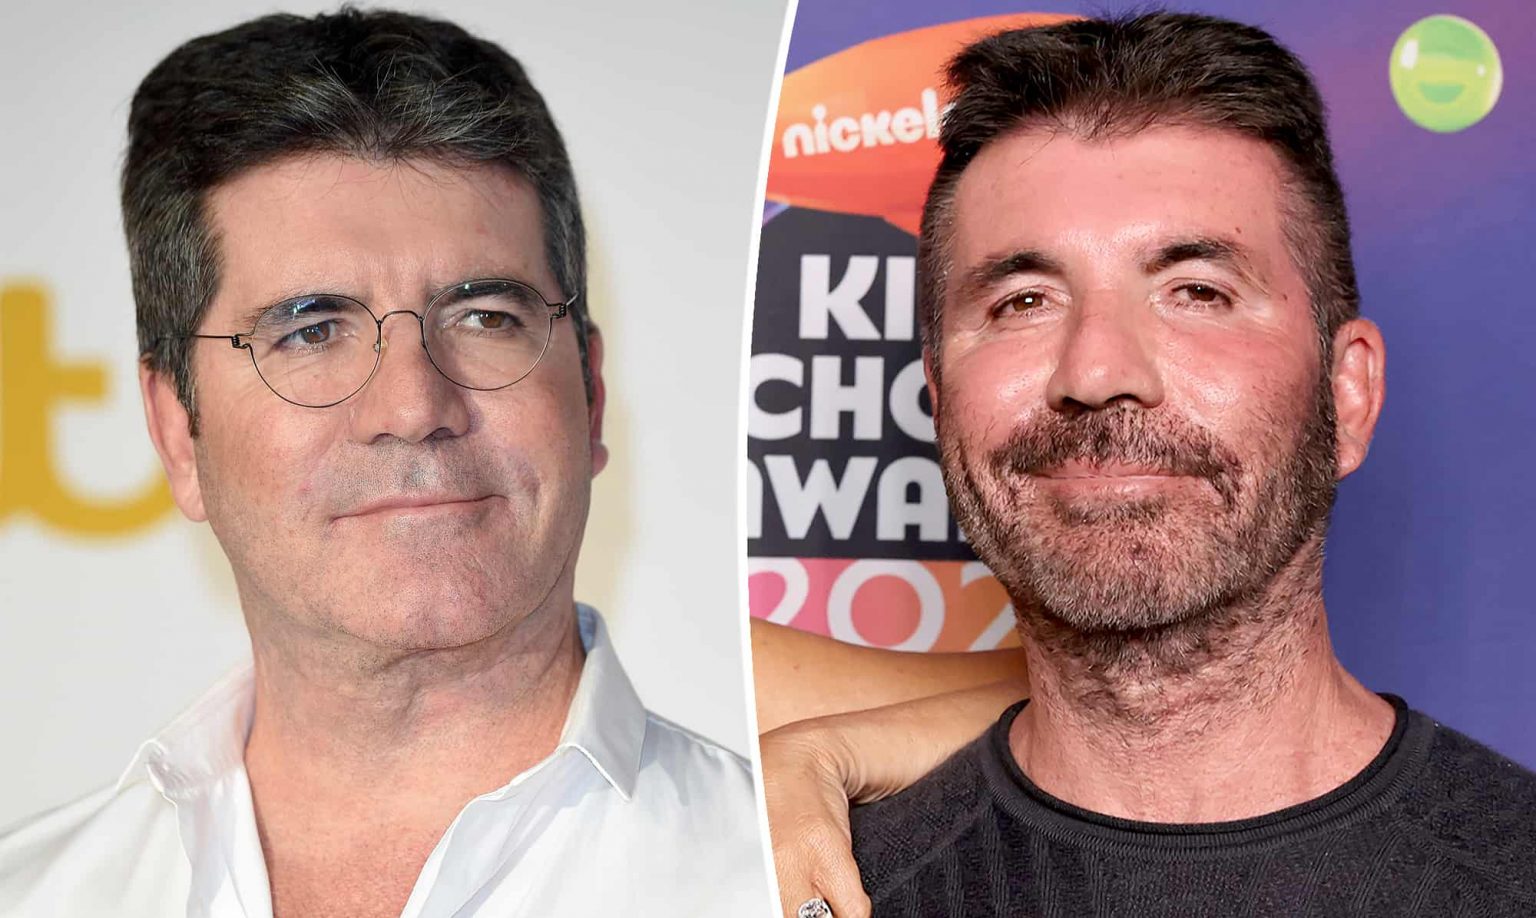 What Happened To Simon Cowell's Face? Why Are Fans Making Fun Of His